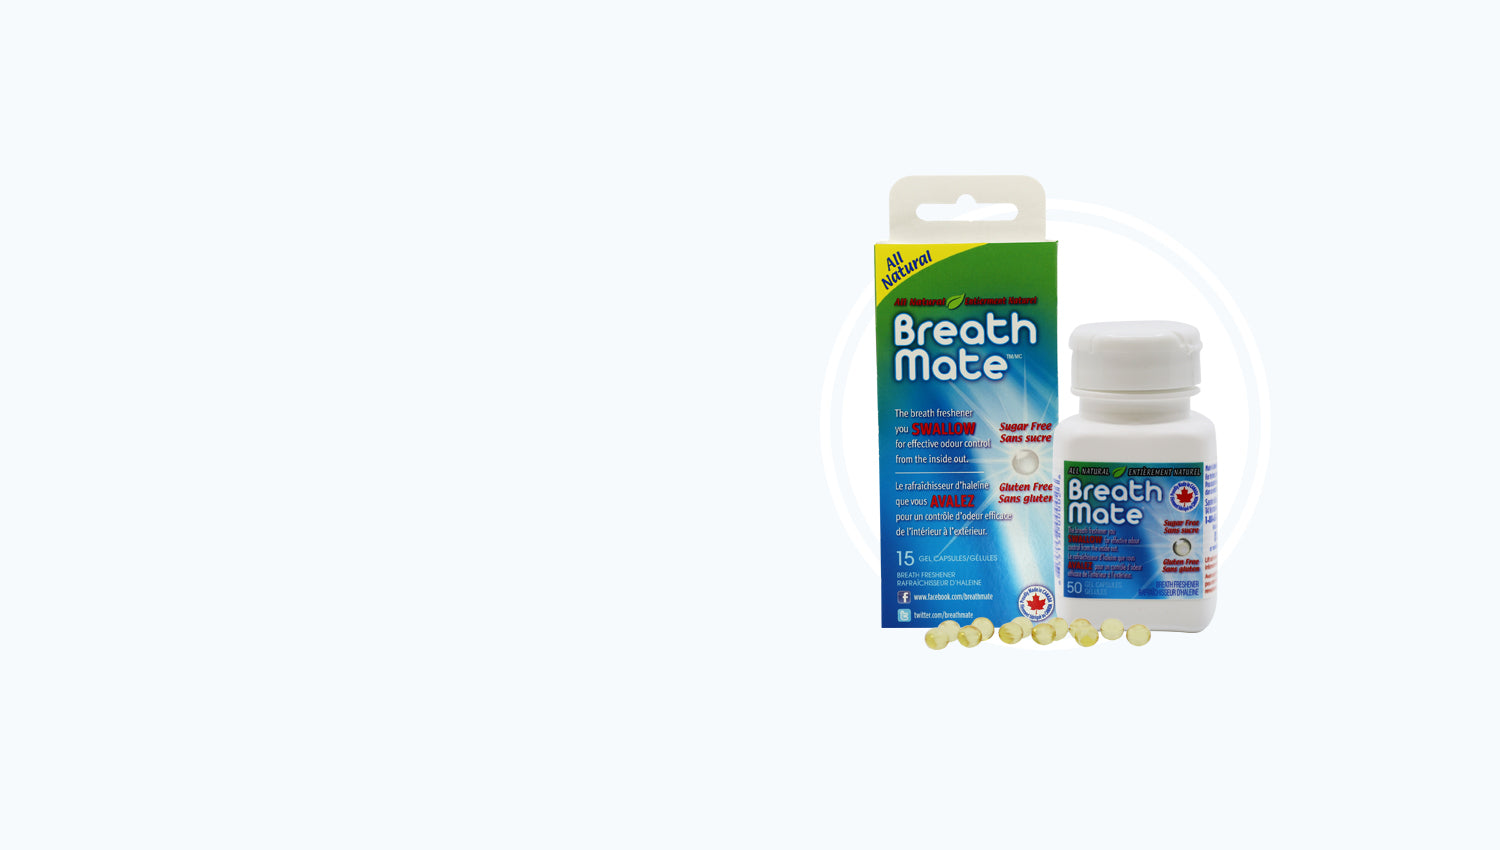 Breathmate bottle and blister pack products bundled